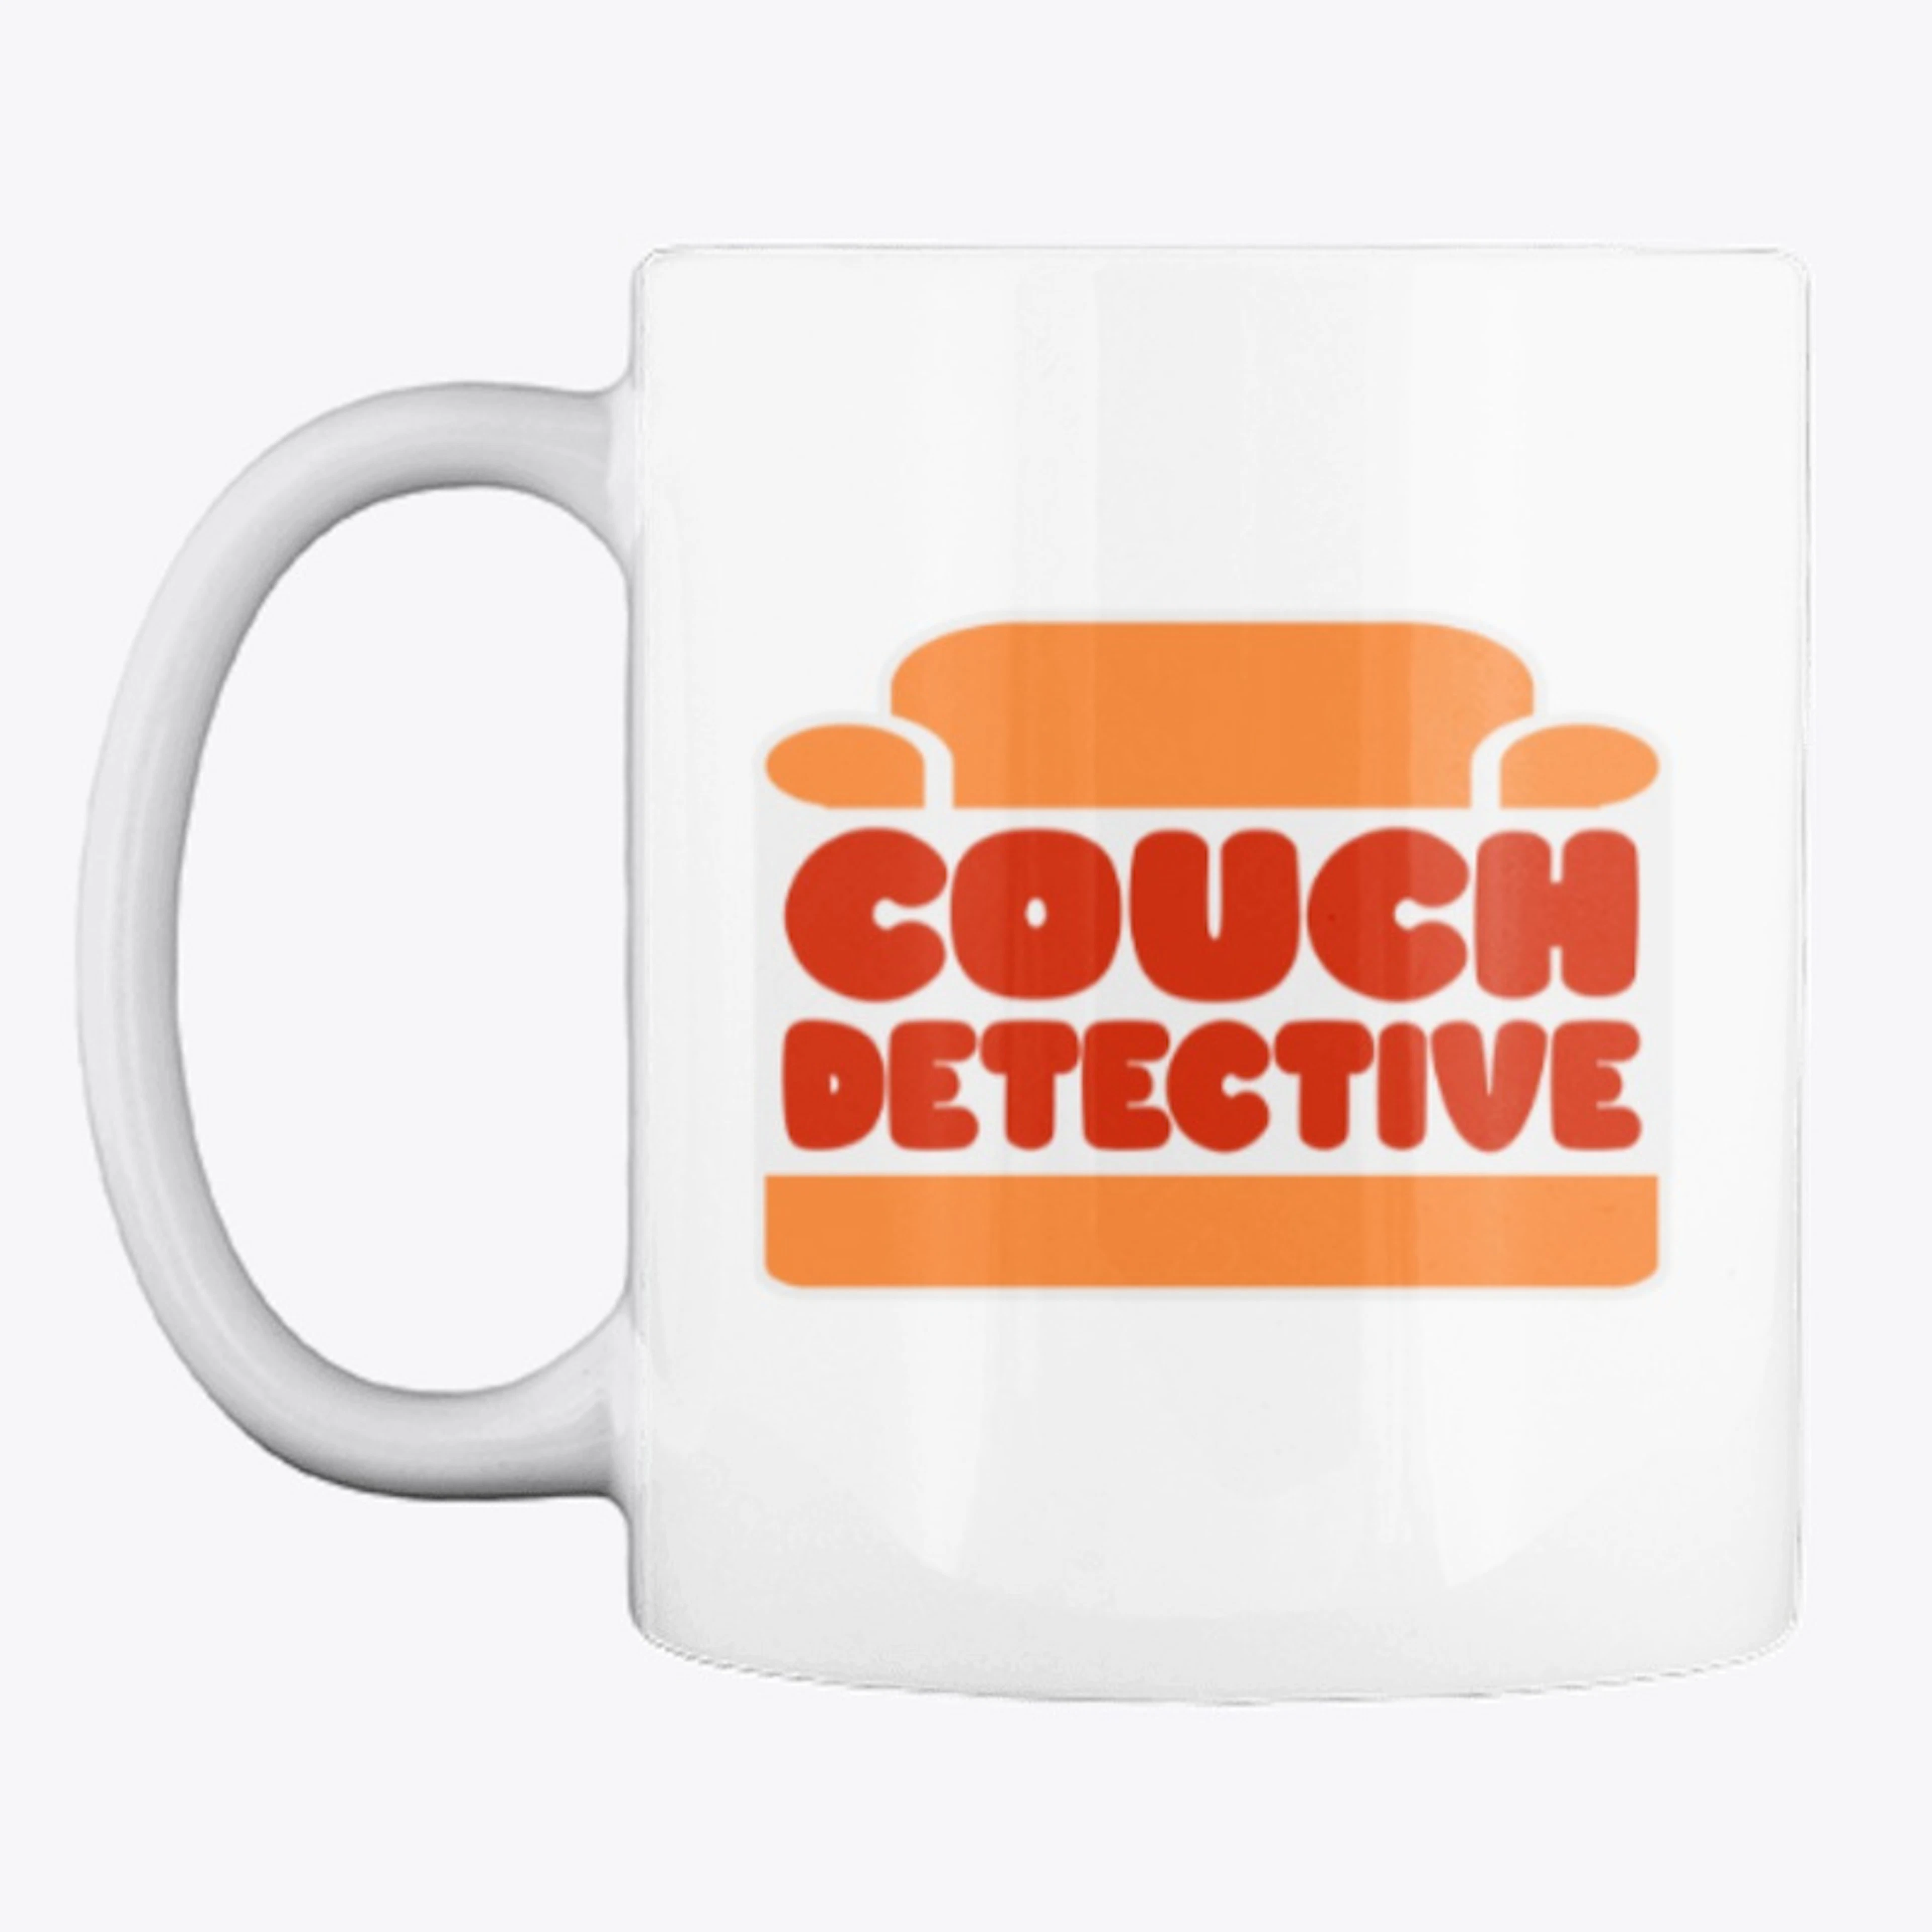 The Couch Detective 